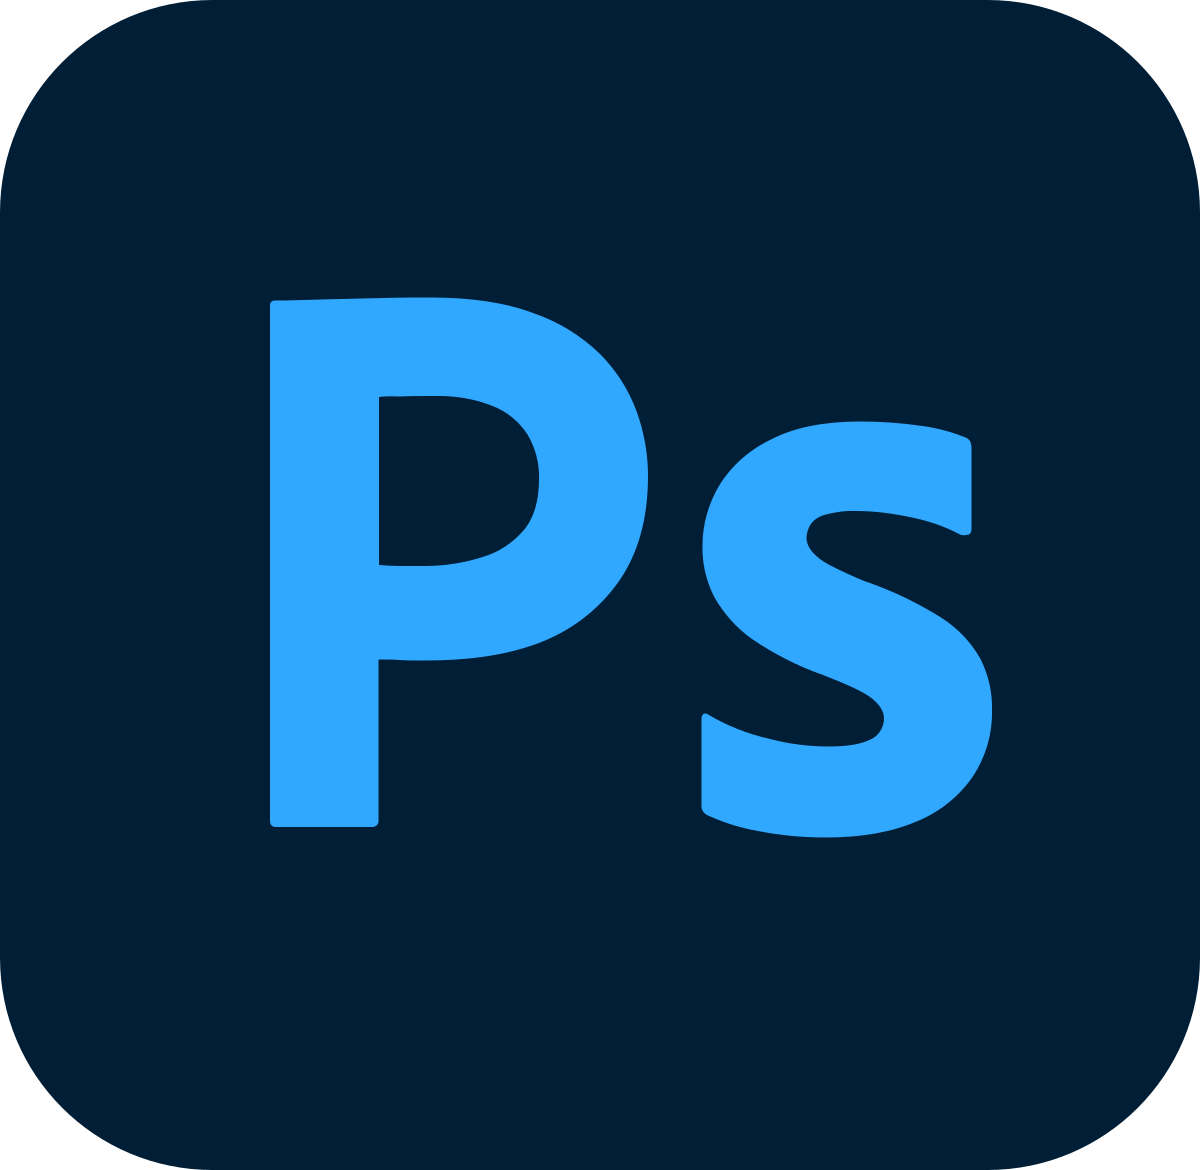 load fonts on mac for photoshop cc 2015